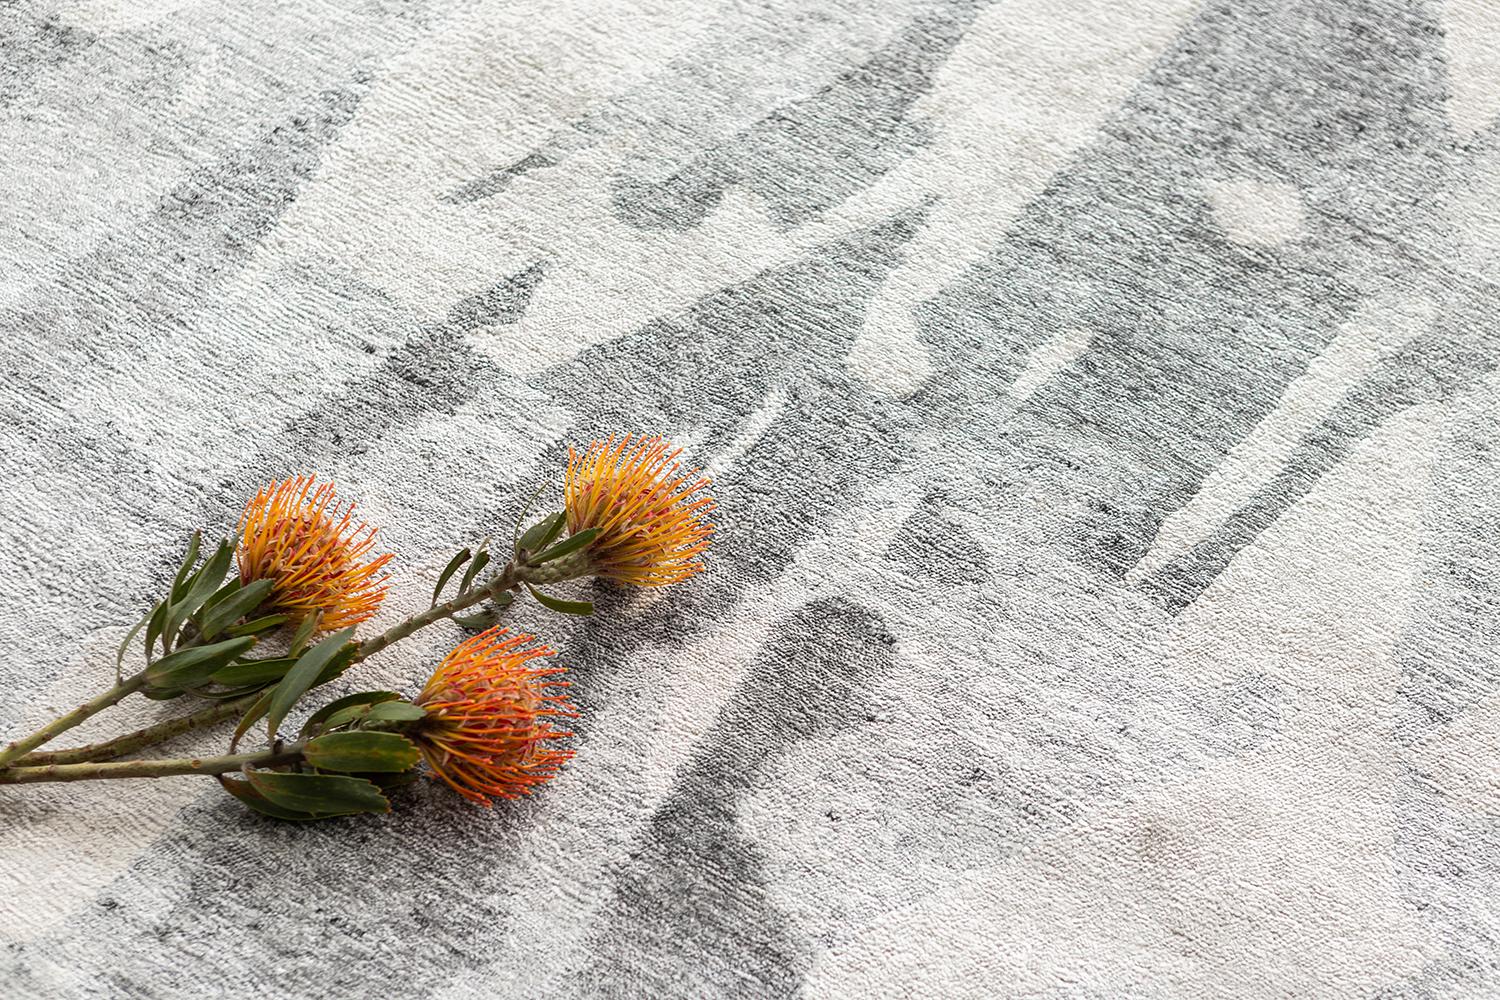 Luminous gray hues and rich waves of Abrash create an endless fascinating effect in this 'Hibagon’ rug in Yokai collection. The cool grayish colorway features some natural gradations of a broken mirror illusion. With its simplicity and mesmerizing